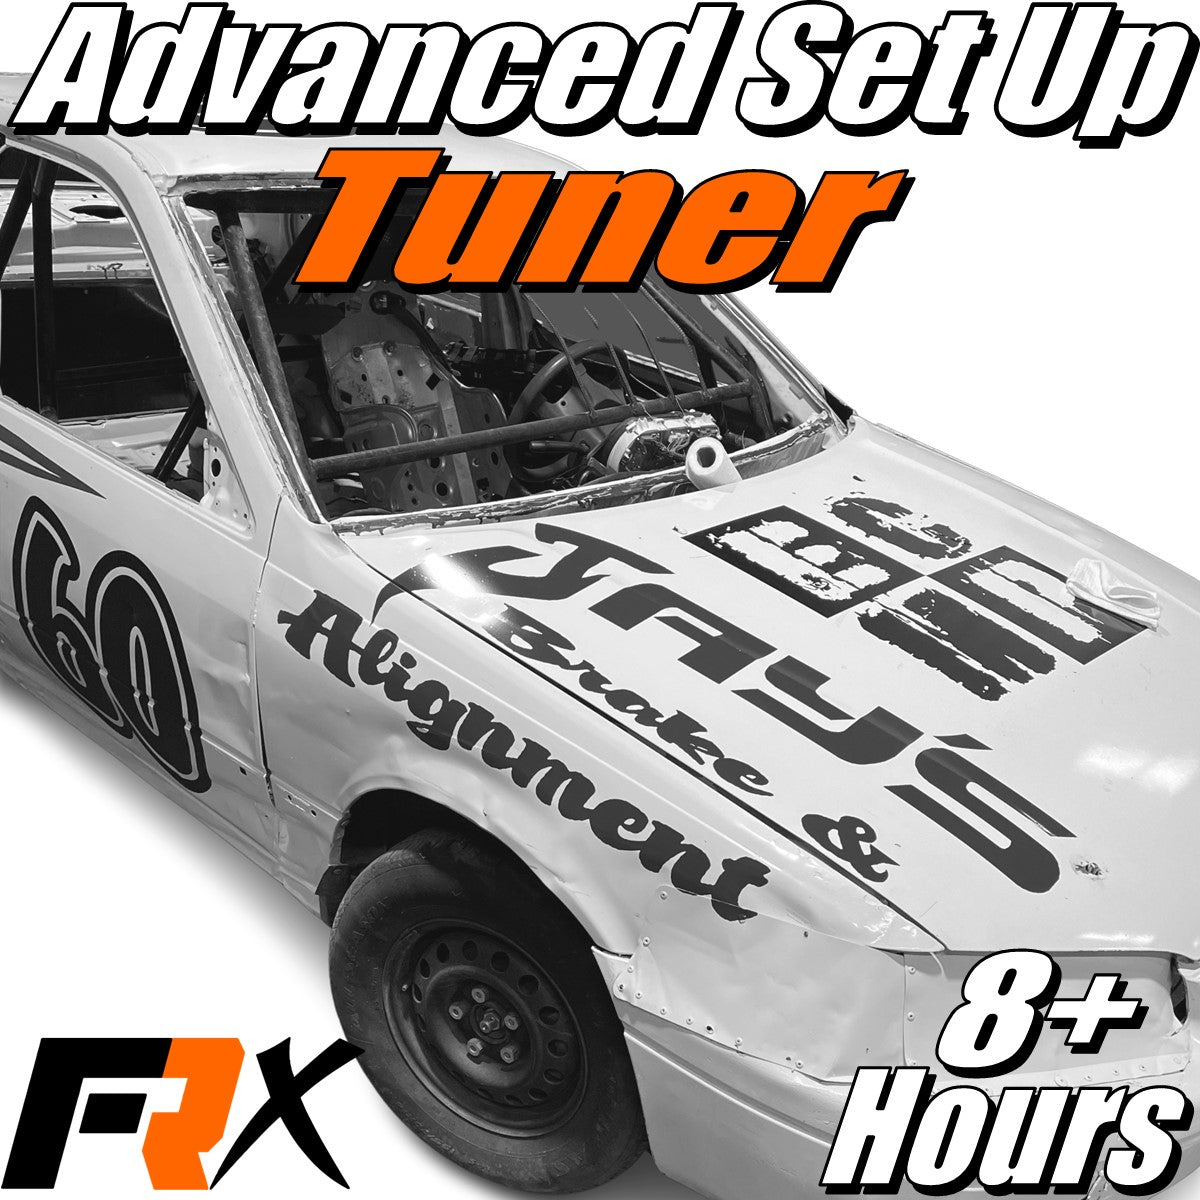 Fauver Racing Xperience Gift Certificate